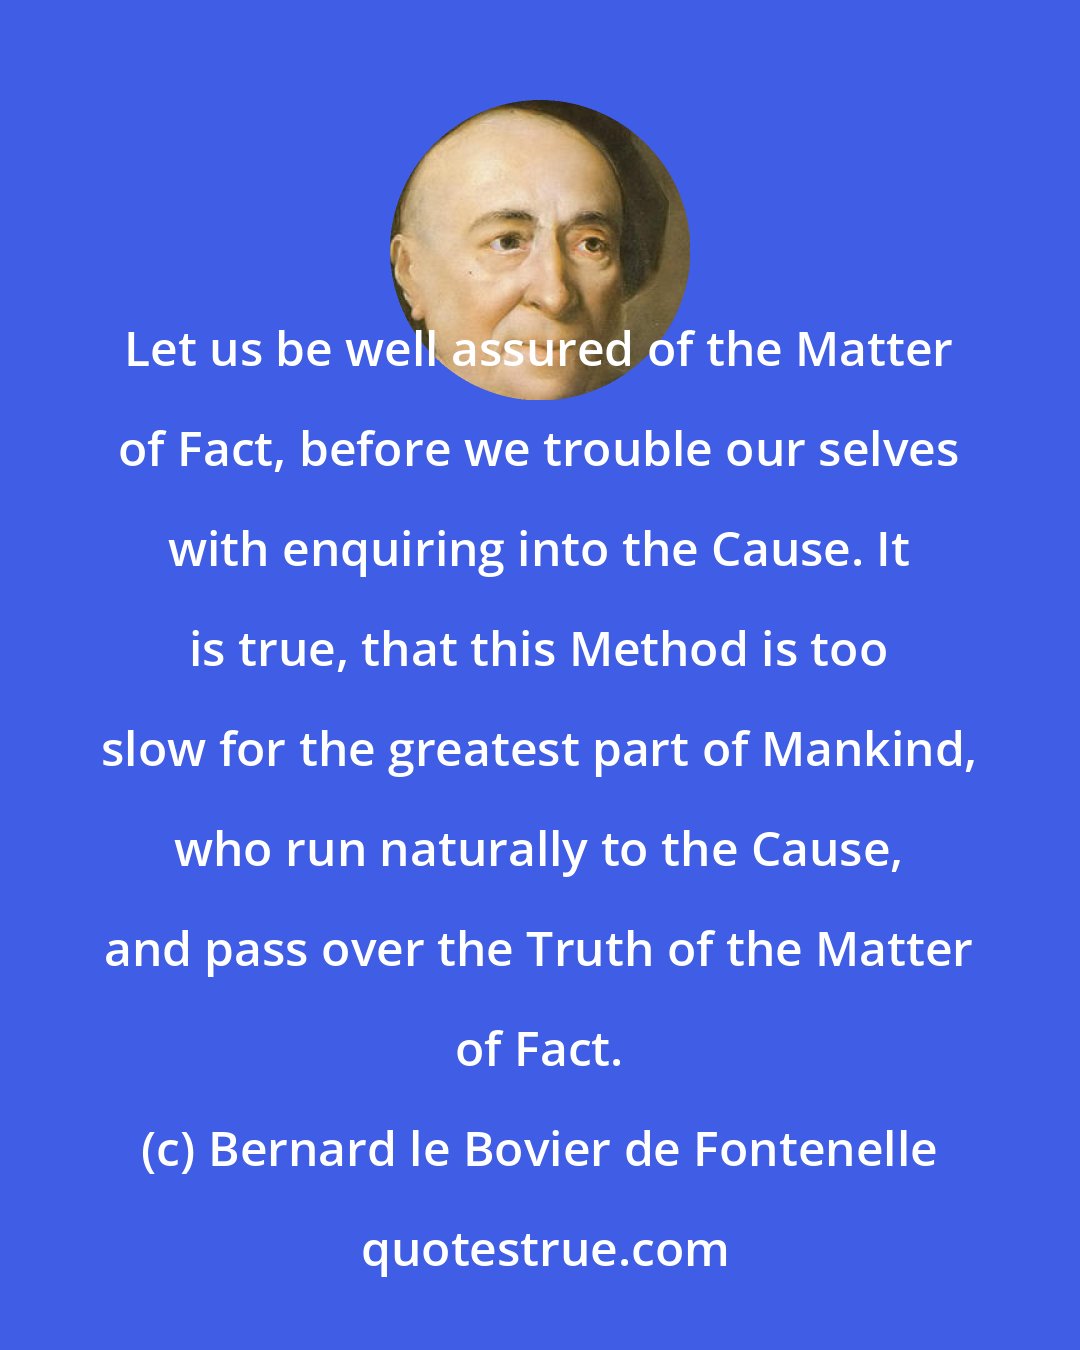 Bernard le Bovier de Fontenelle: Let us be well assured of the Matter of Fact, before we trouble our selves with enquiring into the Cause. It is true, that this Method is too slow for the greatest part of Mankind, who run naturally to the Cause, and pass over the Truth of the Matter of Fact.